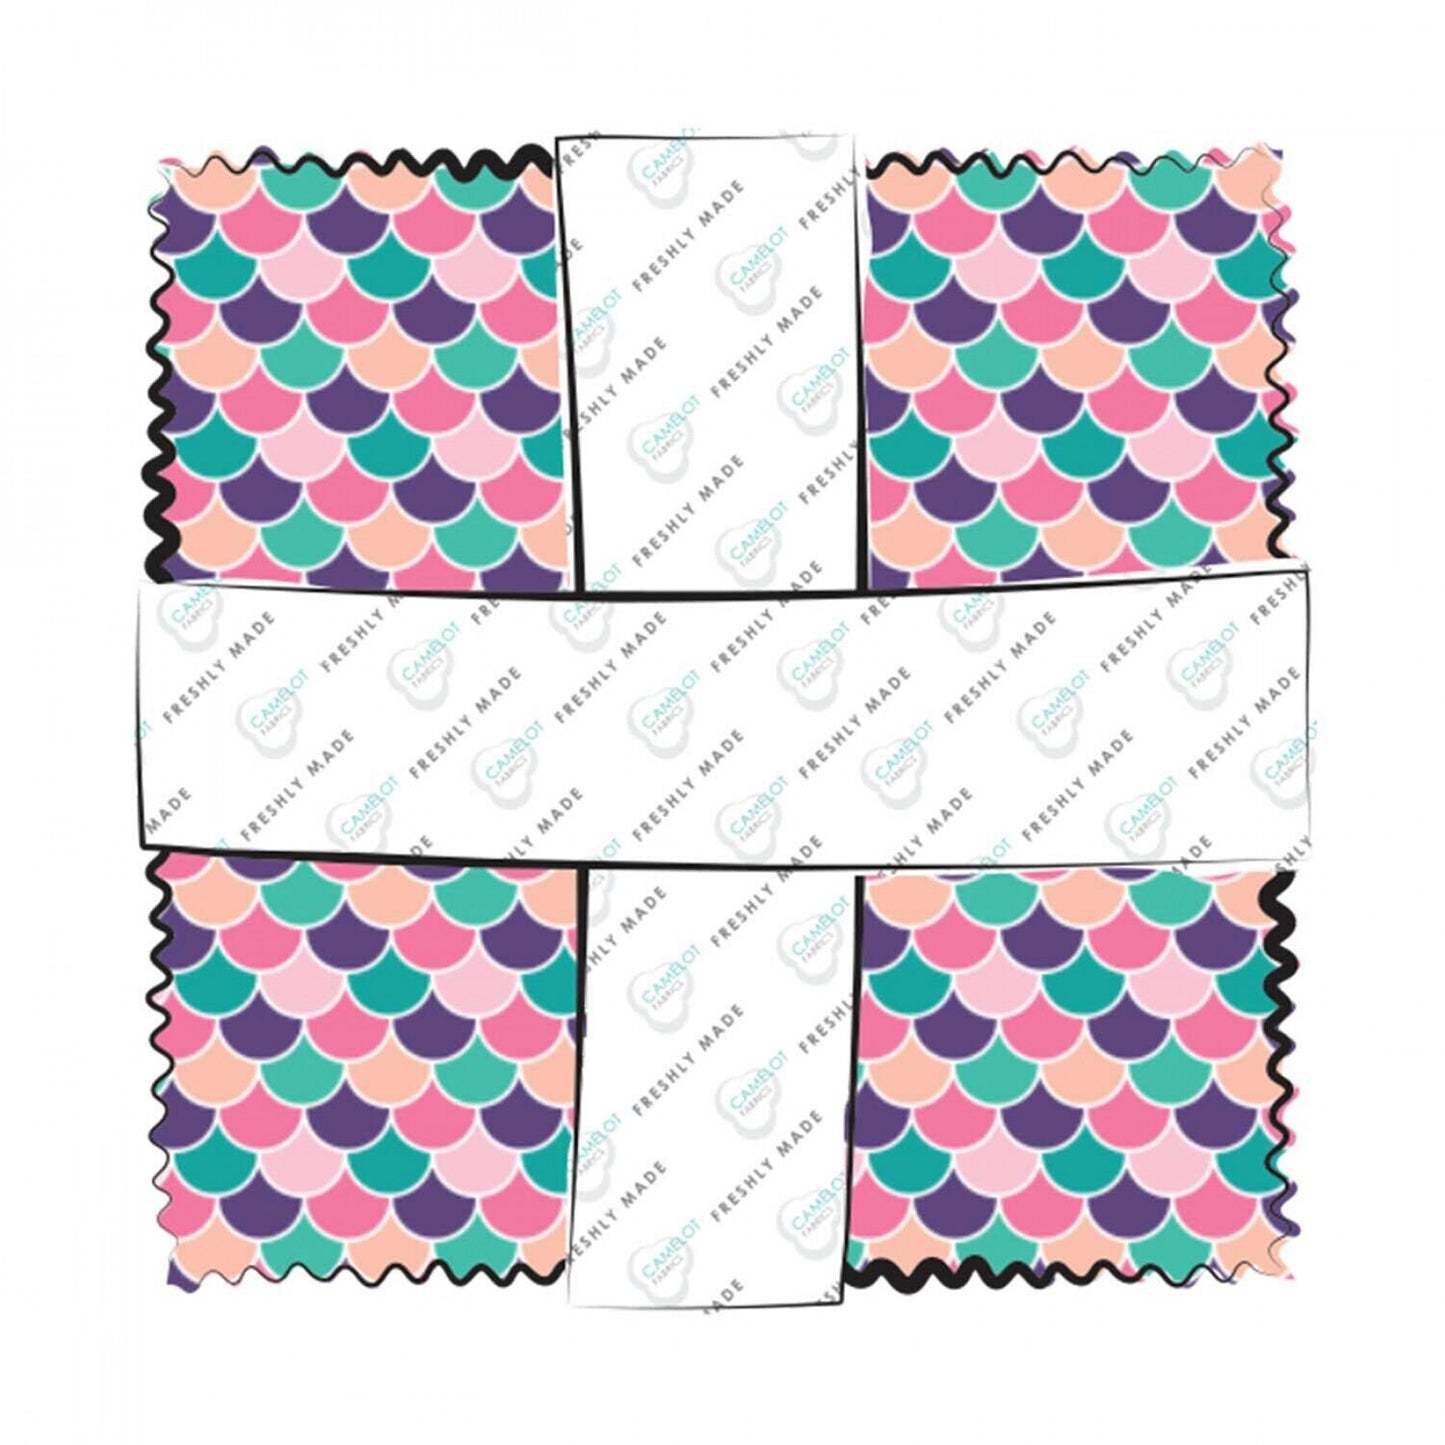 Very Punny 5" Squares, 42 Pieces per Bundle 21181711CHA Cotton Woven Fabric